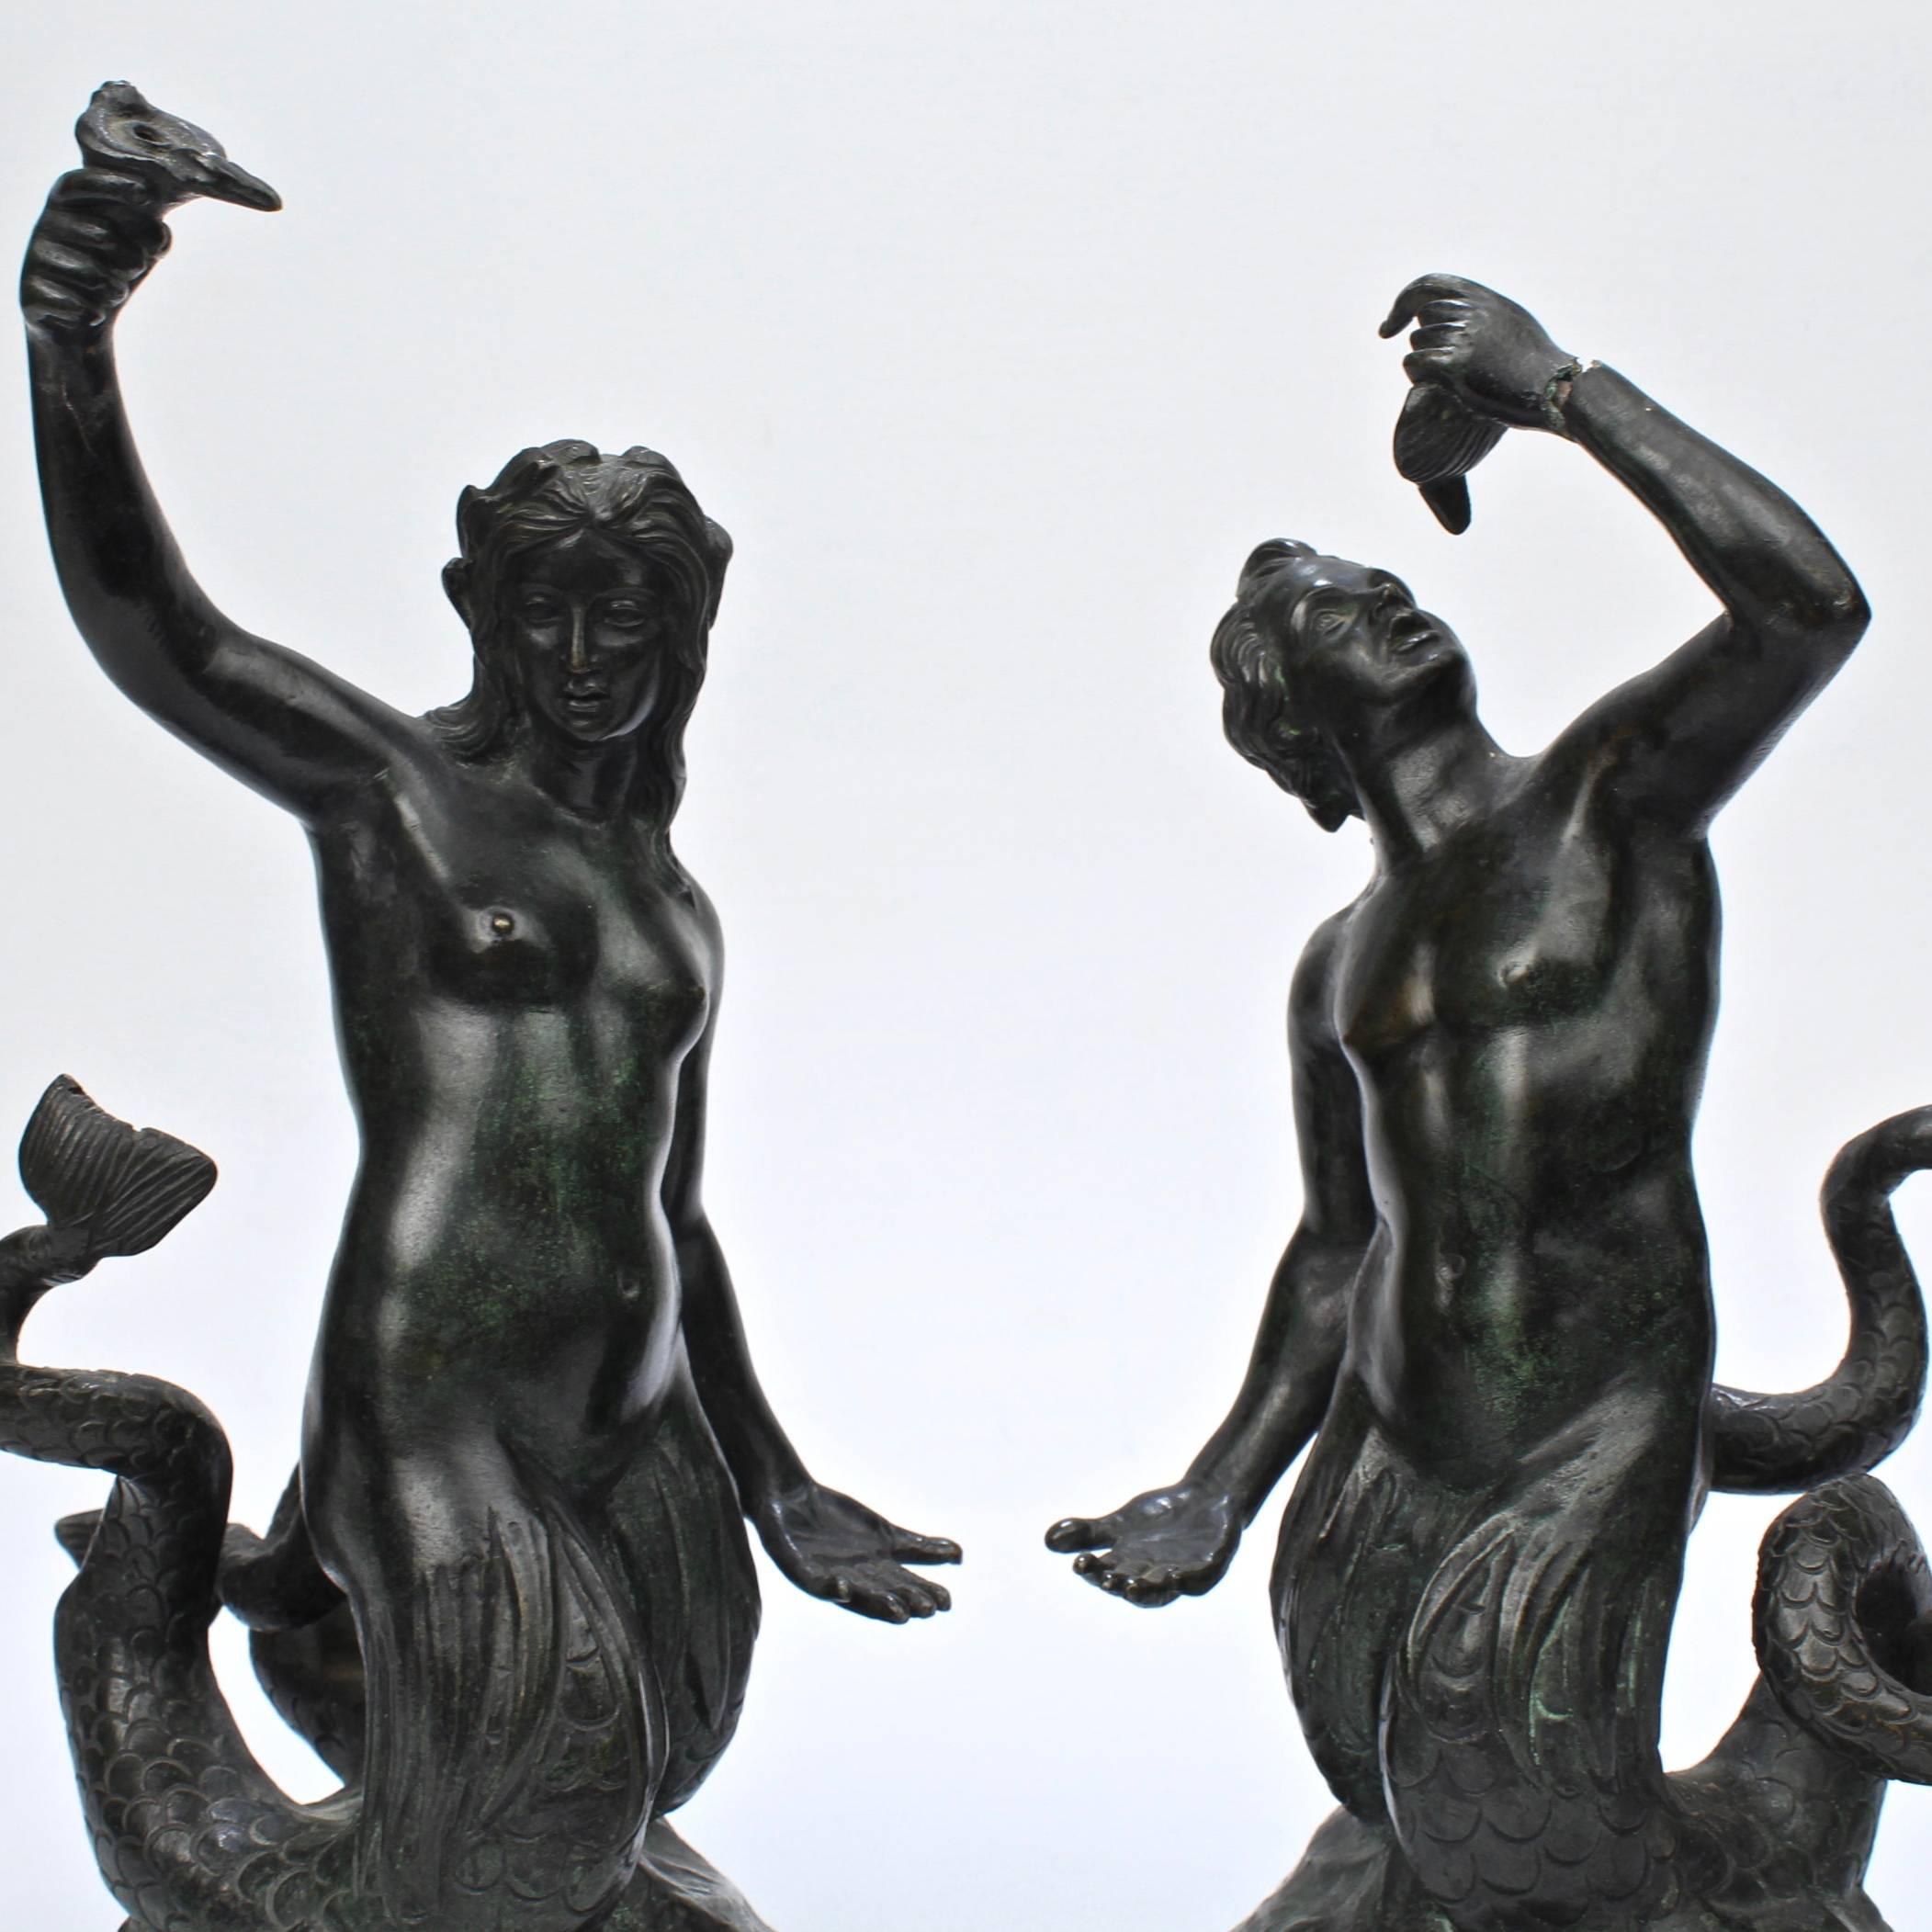 A fine pair of grand tour fountain sculptures.

Depicting a mermaid and merman, each small sculpture appears to be a functional miniature fountain with copper tubing.

The merman has a split to his arm near the wrist.

Height Mermaid: ca. 9